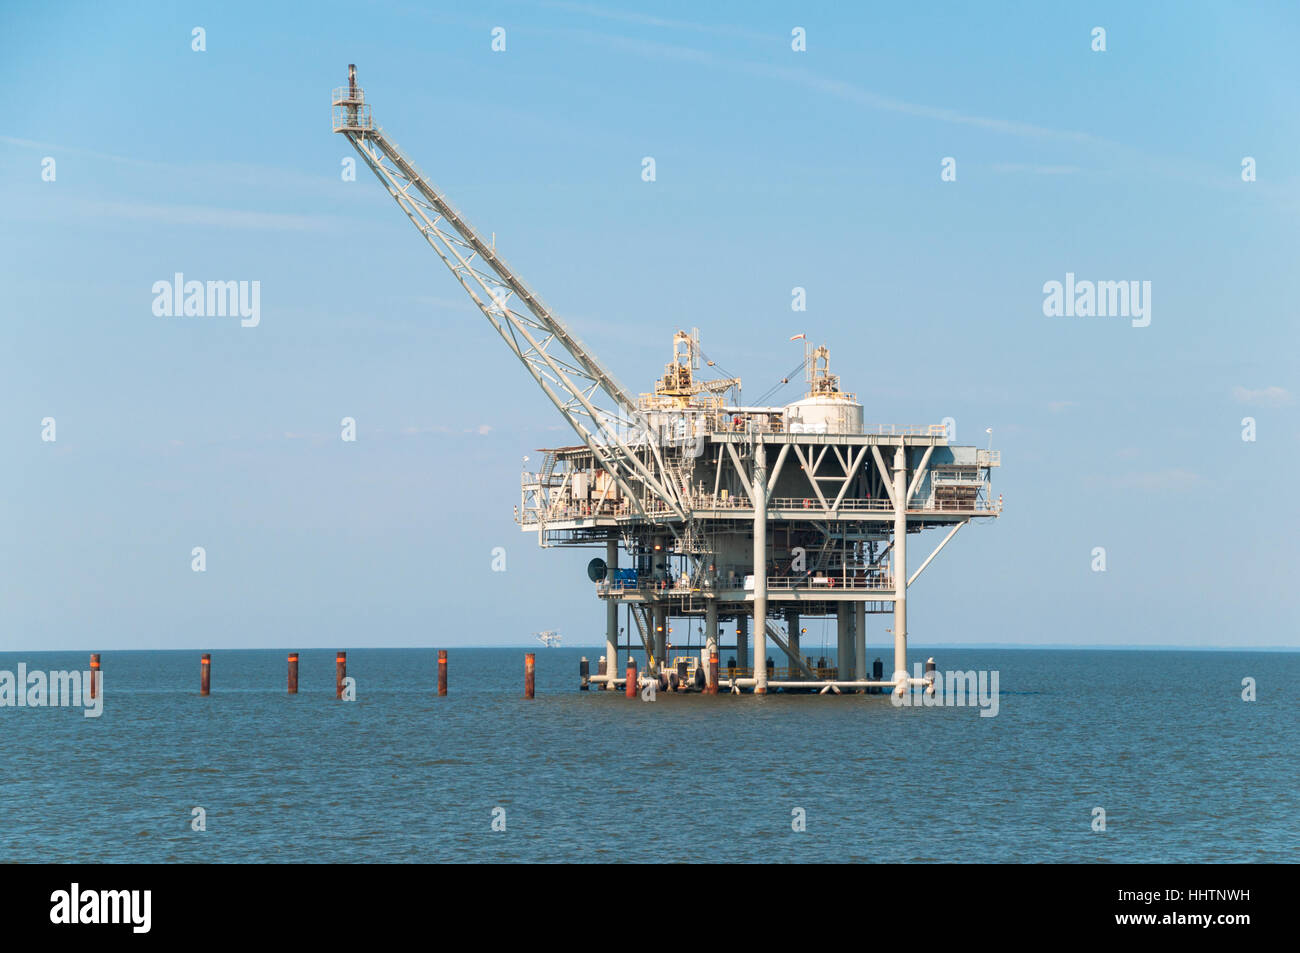 Offshore oil rig in the ocean Stock Photo